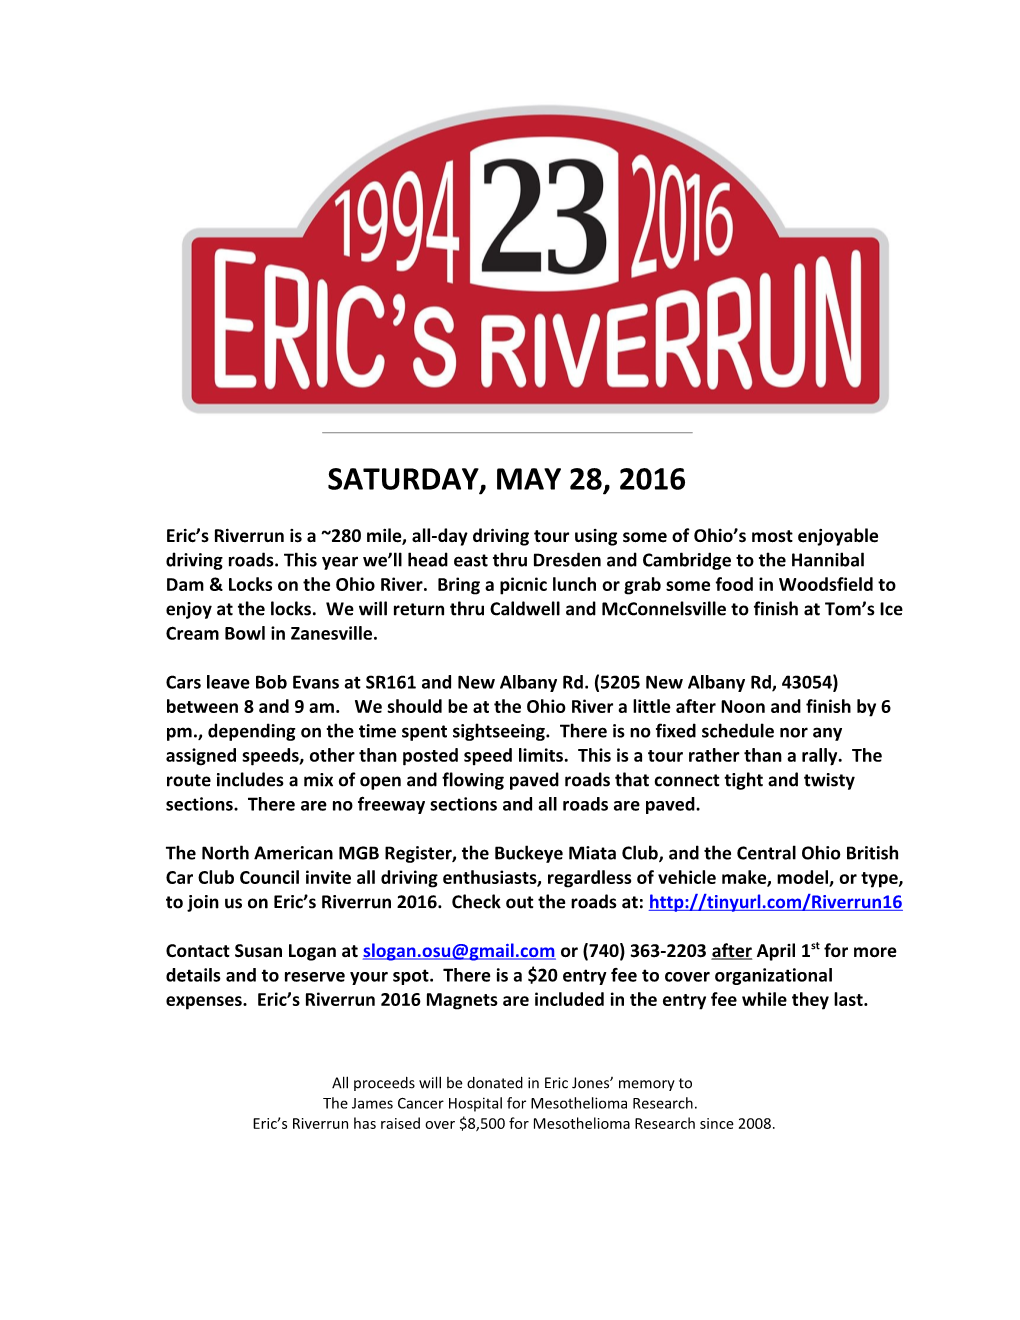 Eric S Riverrun Is a 280 Mile, All-Day Driving Tour Using Some of Ohio S Most Enjoyable